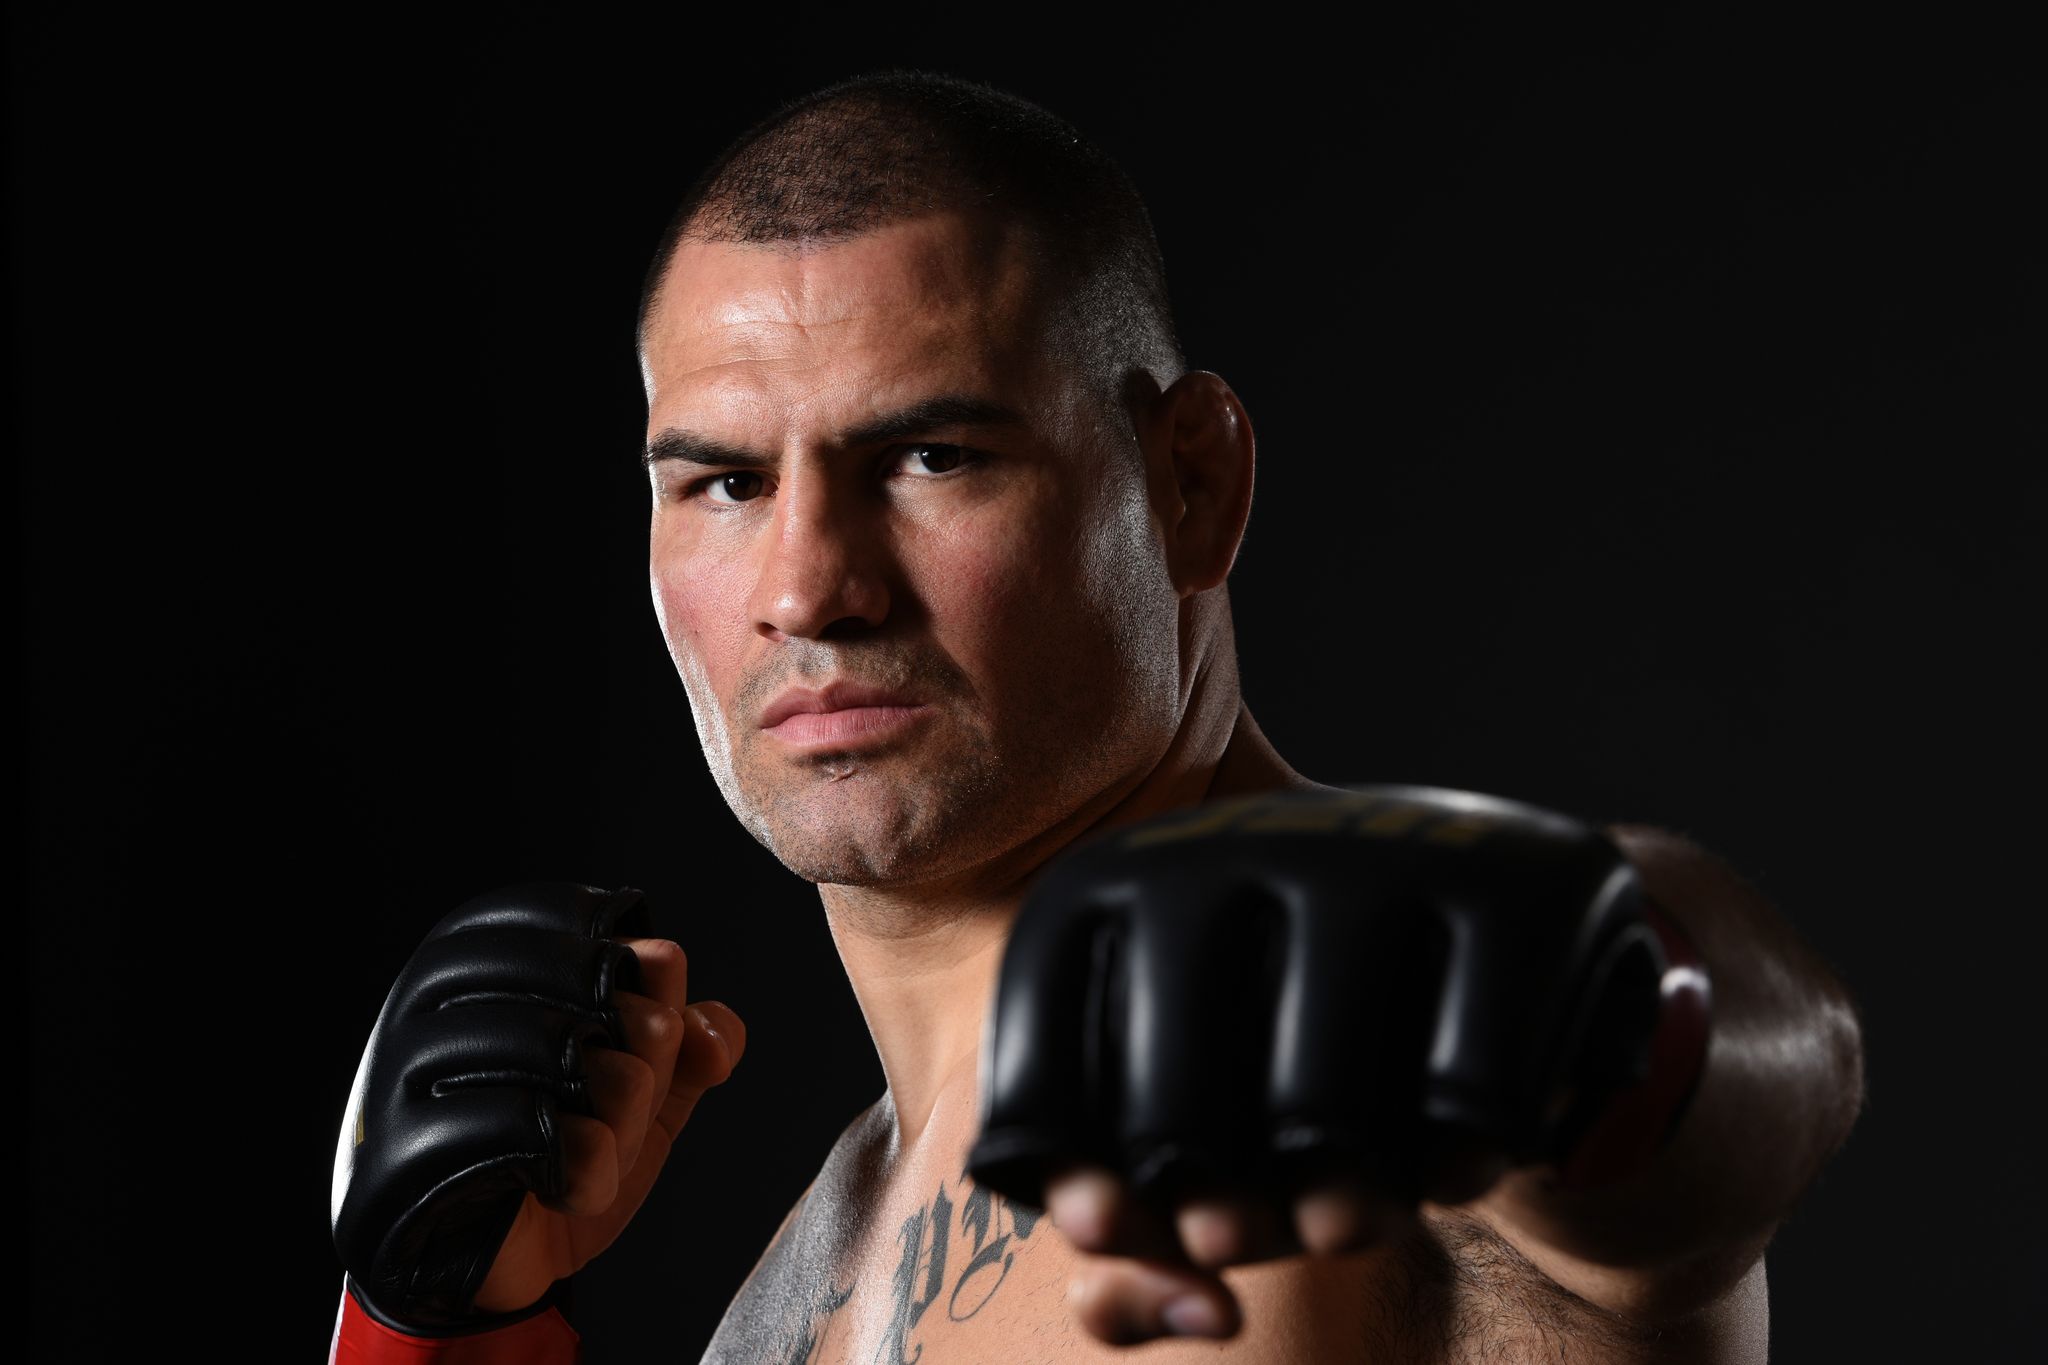 las vegas, nv   july 09  cain velasquez poses for a portrait backstage during the ufc 200 event on july 9, 2016 at t mobile arena in las vegas, nevada  photo by mike roachzuffa llczuffa llc via getty images